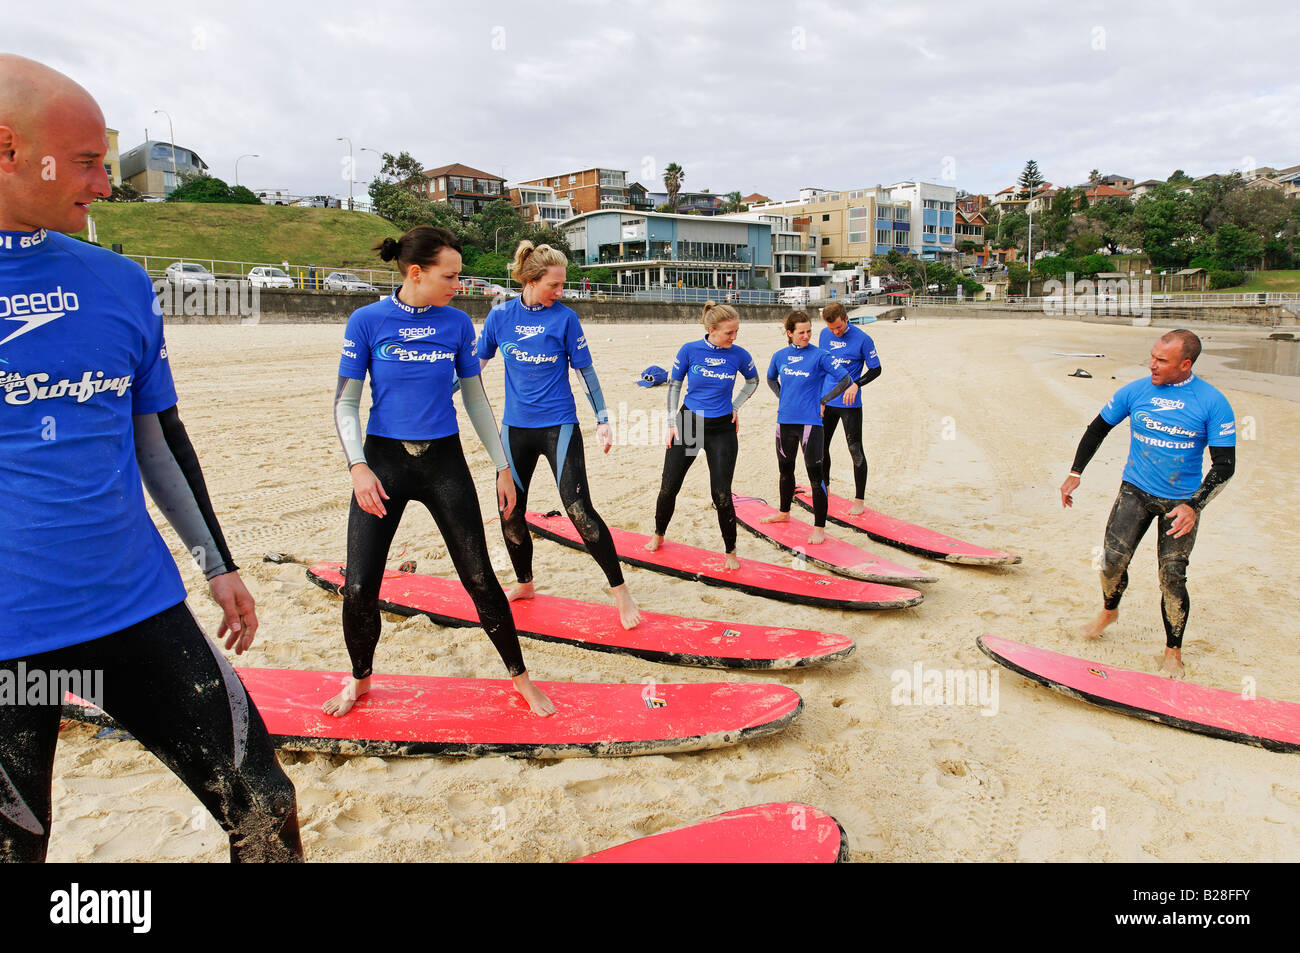 Surfers listening to instructions during surfing lessons at the Bondi Beach, Sydney, New South Wales, Australia Stock Photo